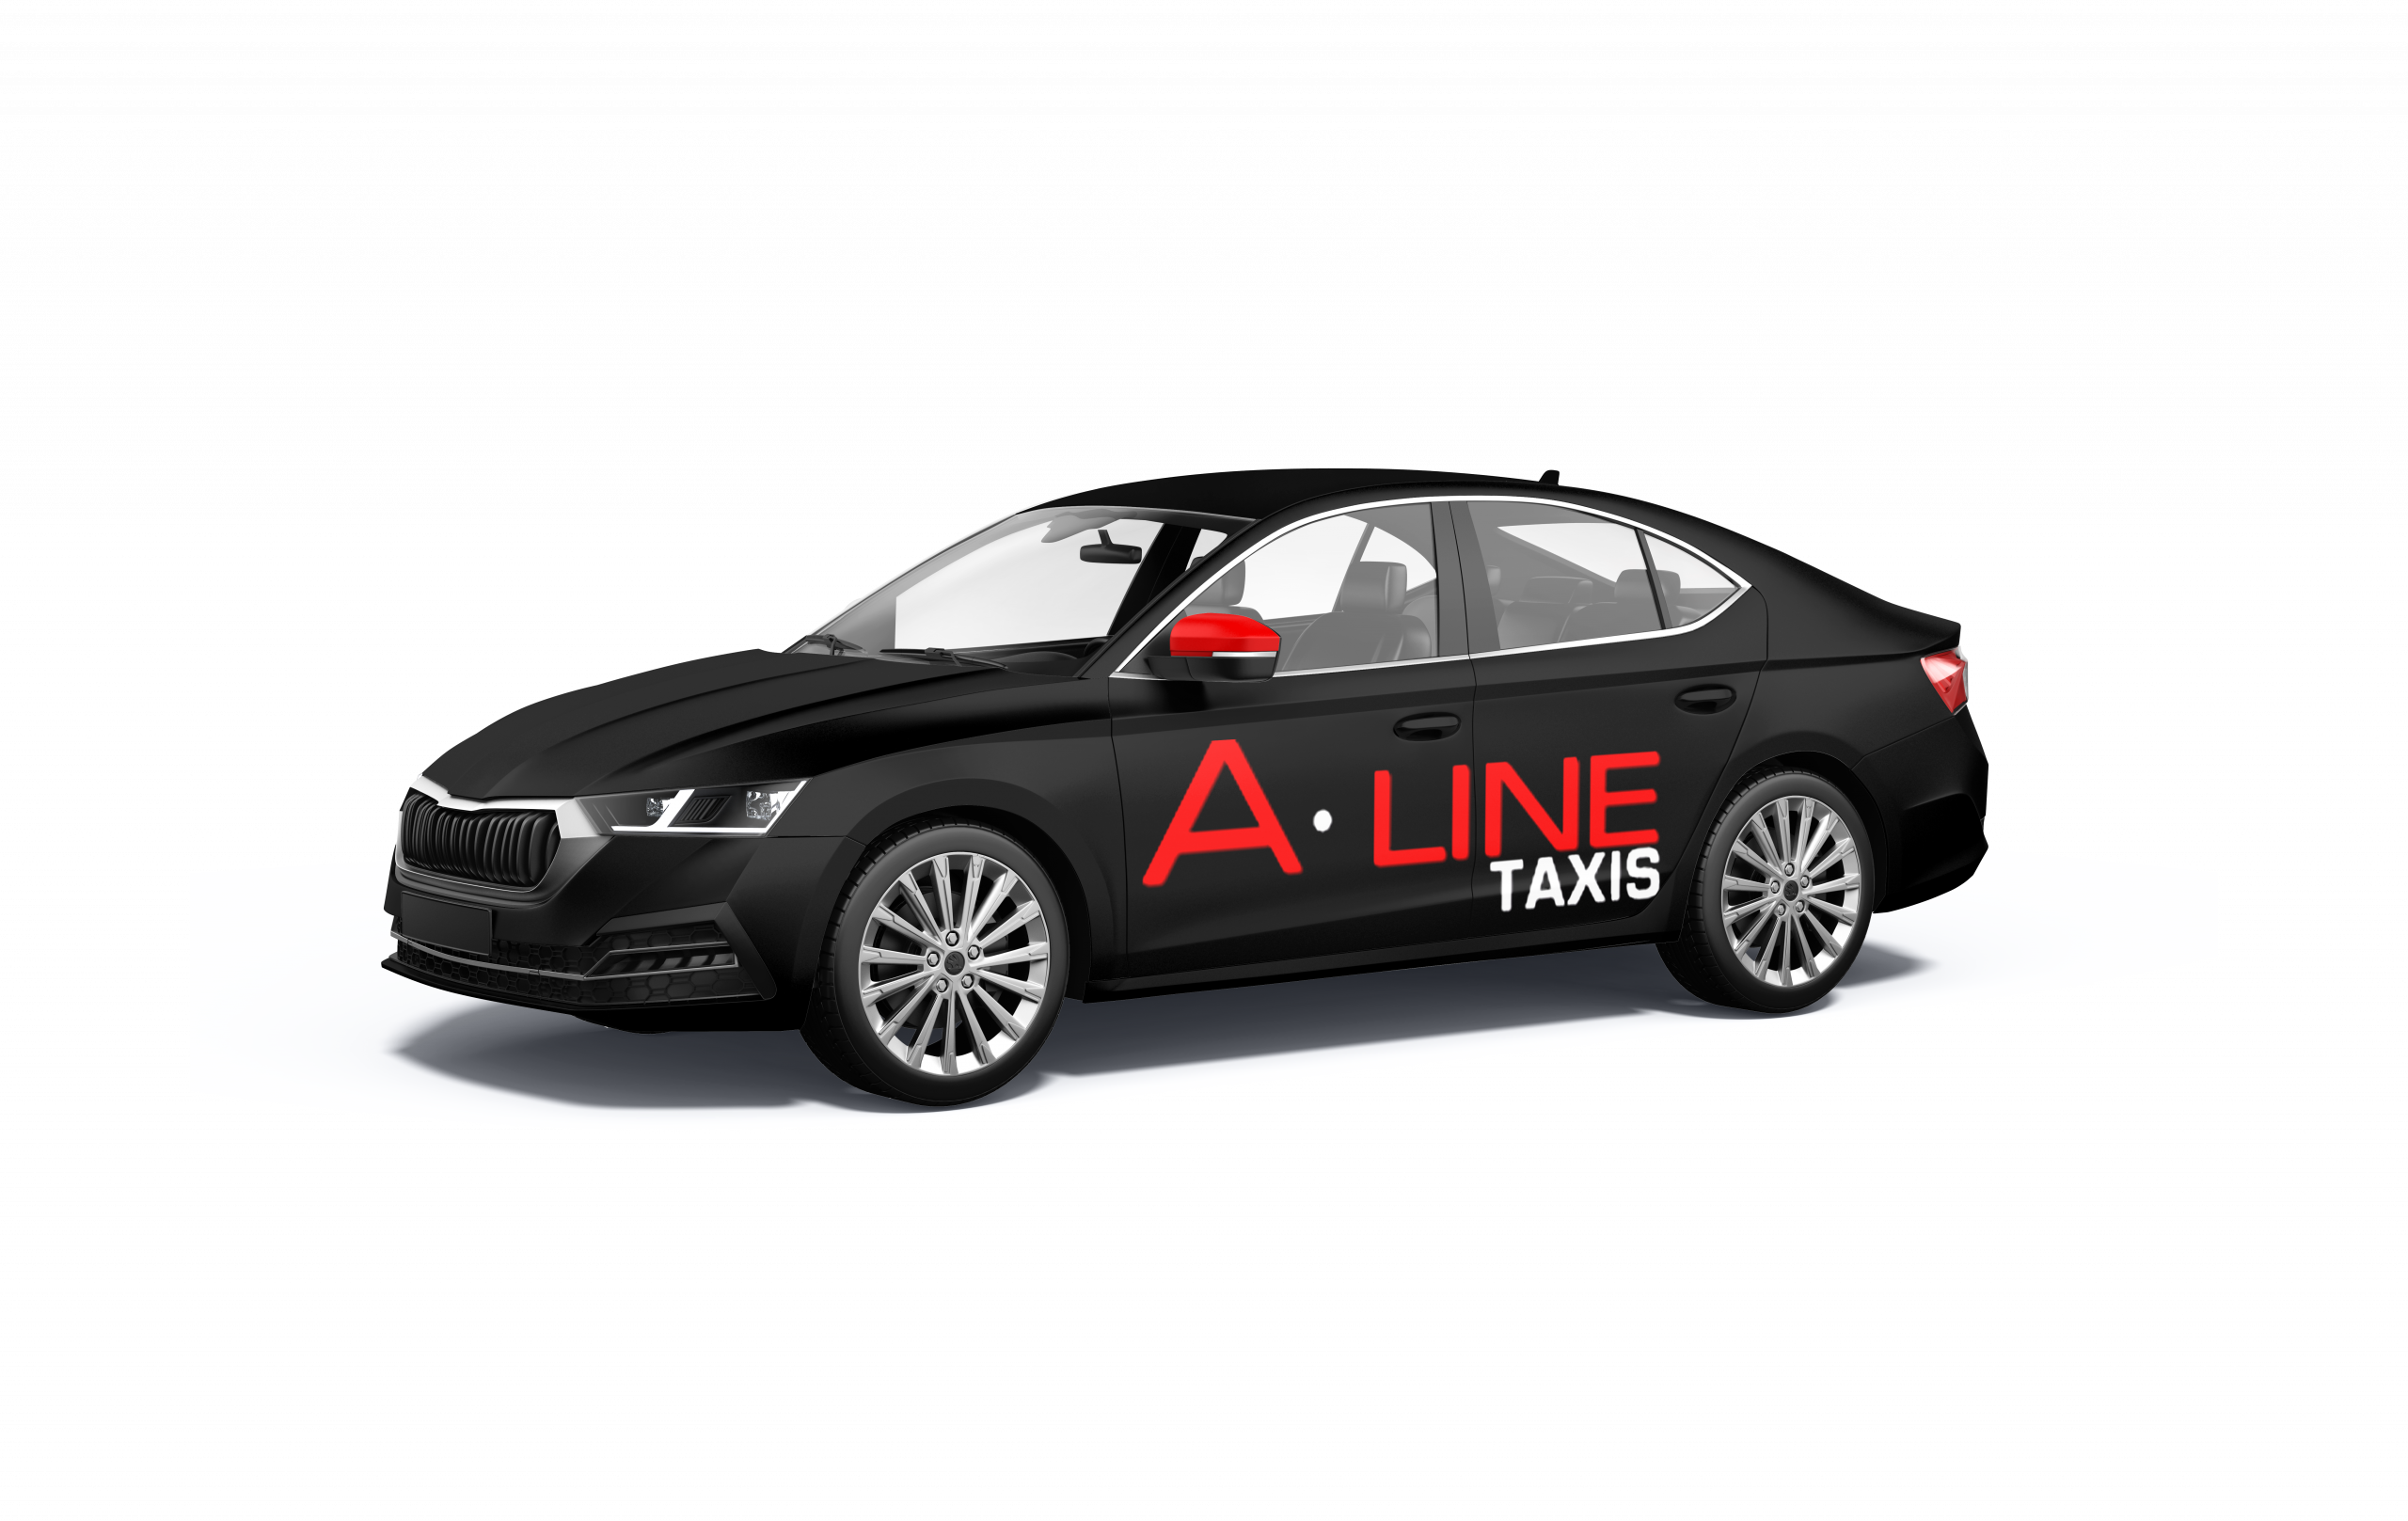 https://a-linetaxis.co.uk/wp-content/uploads/2022/03/A-line-taxi.png